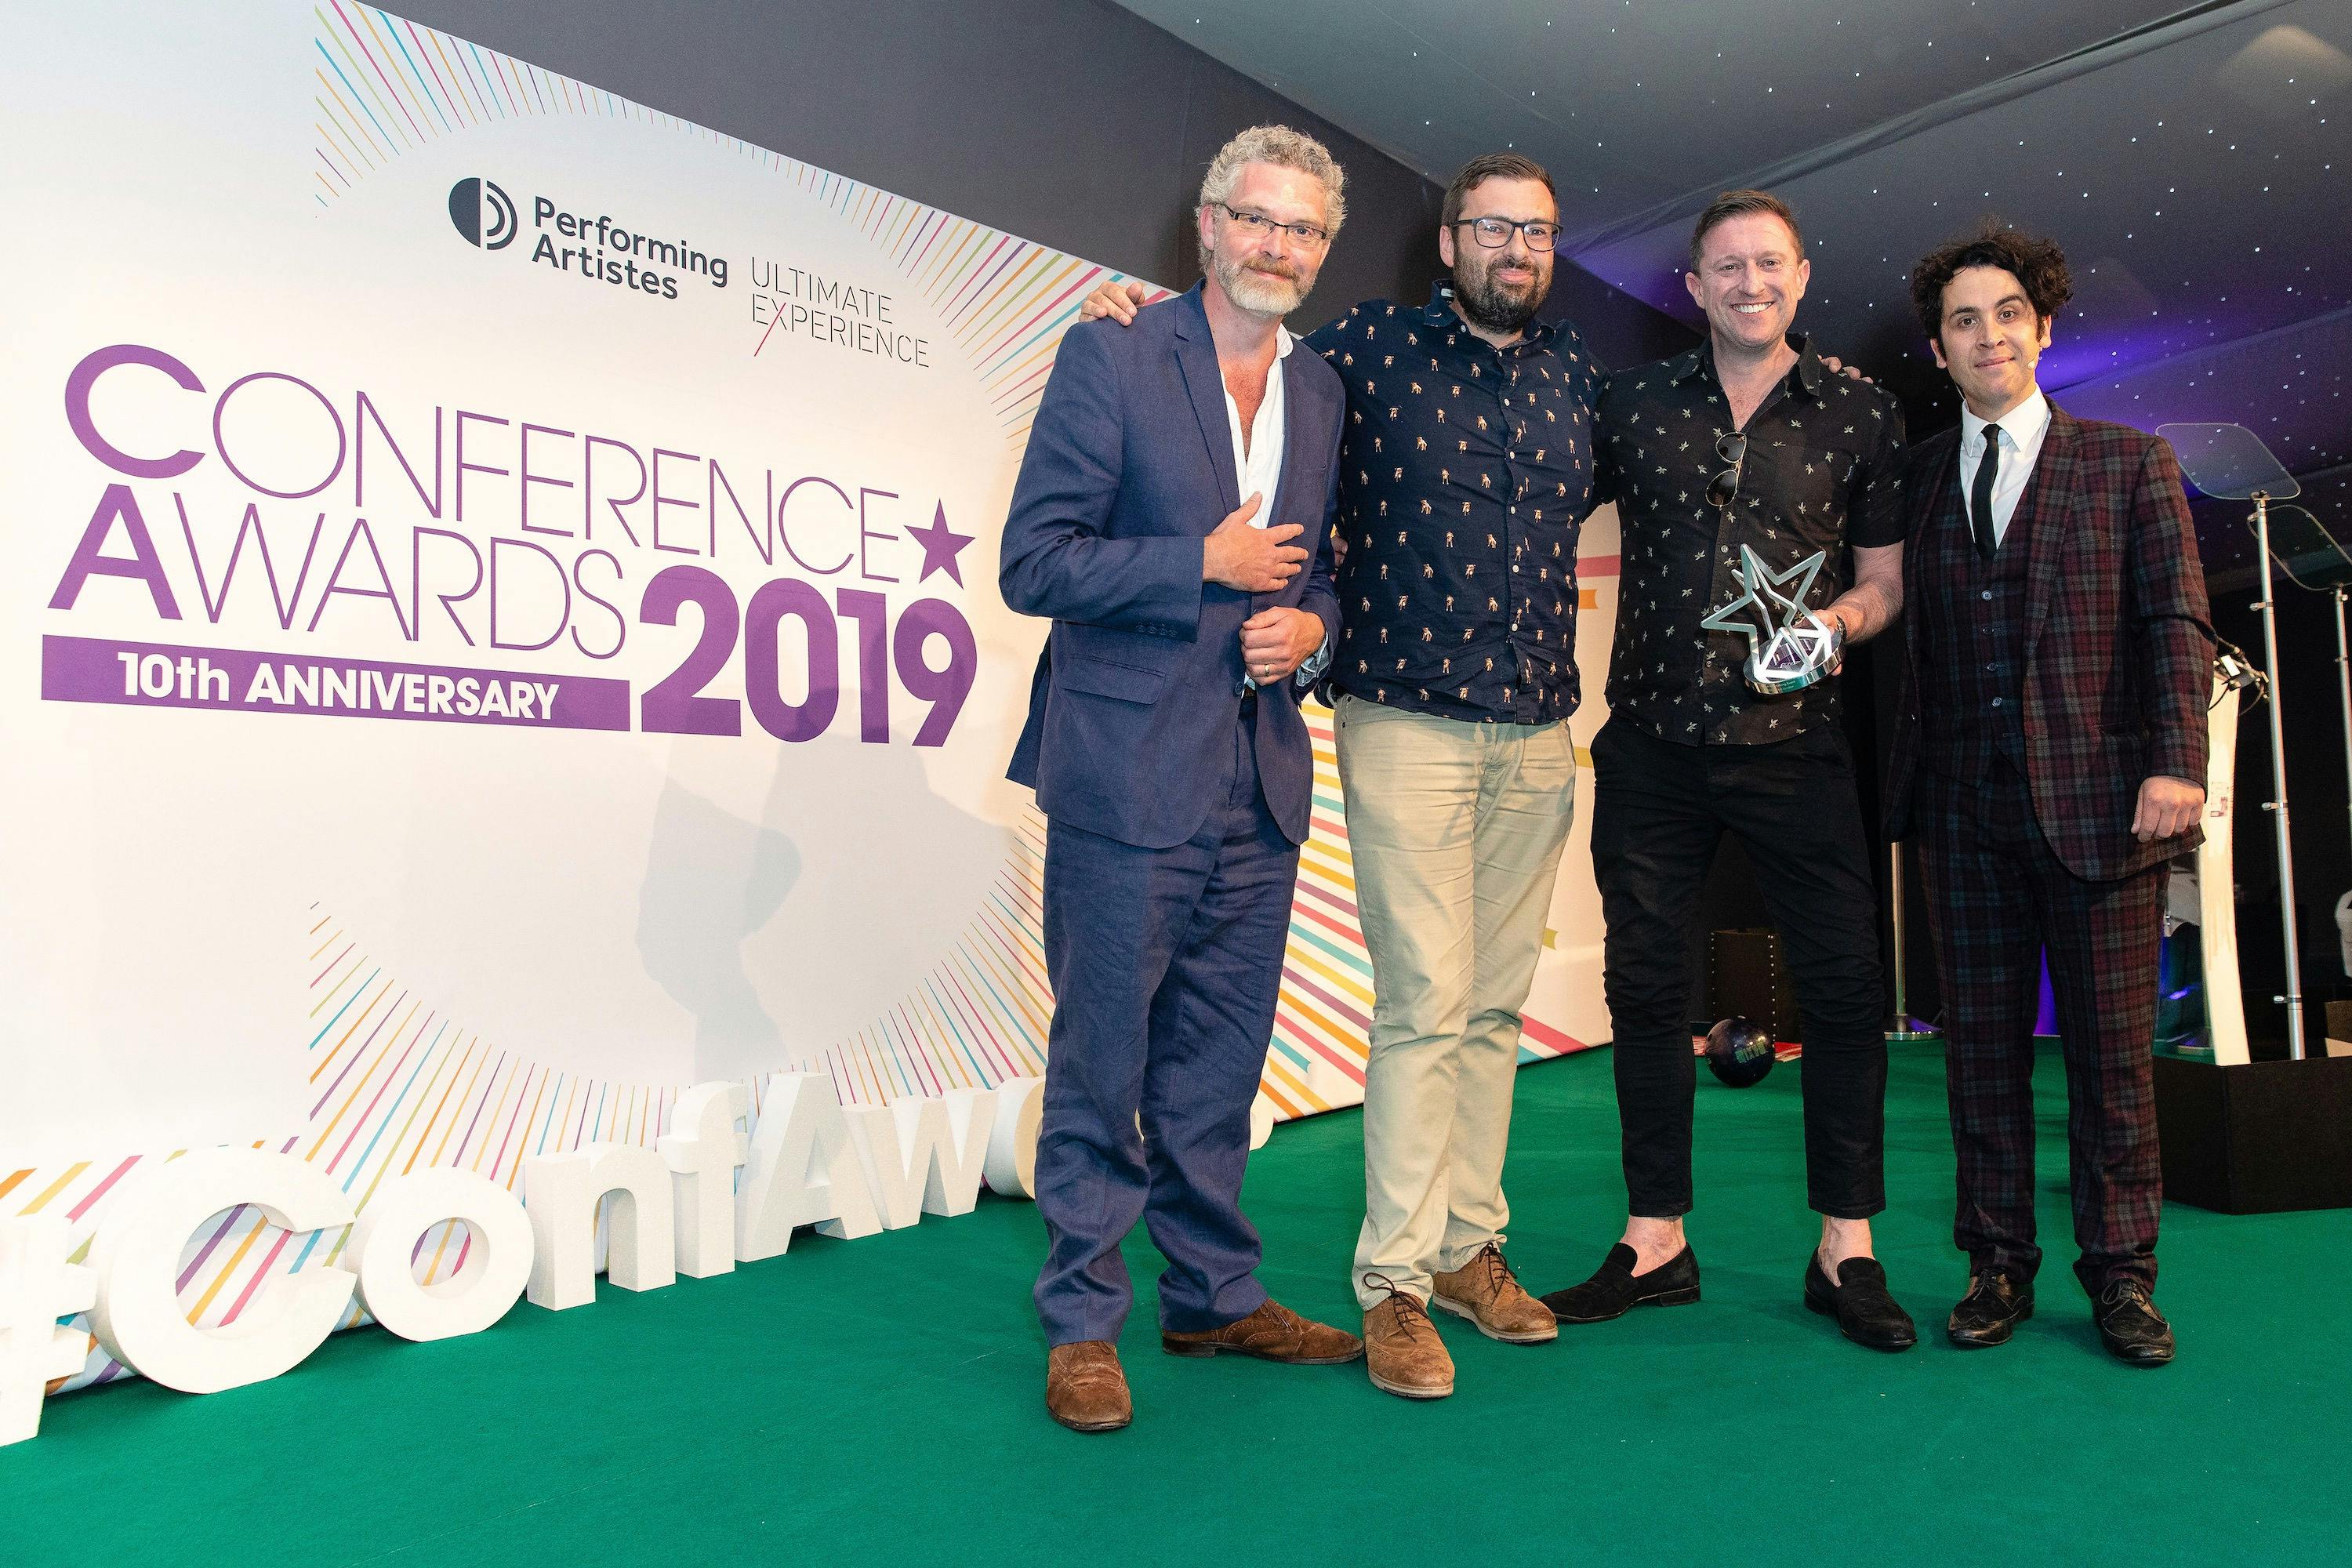 MAD//Fest London Conference Awards 2019 Best Networking Event.